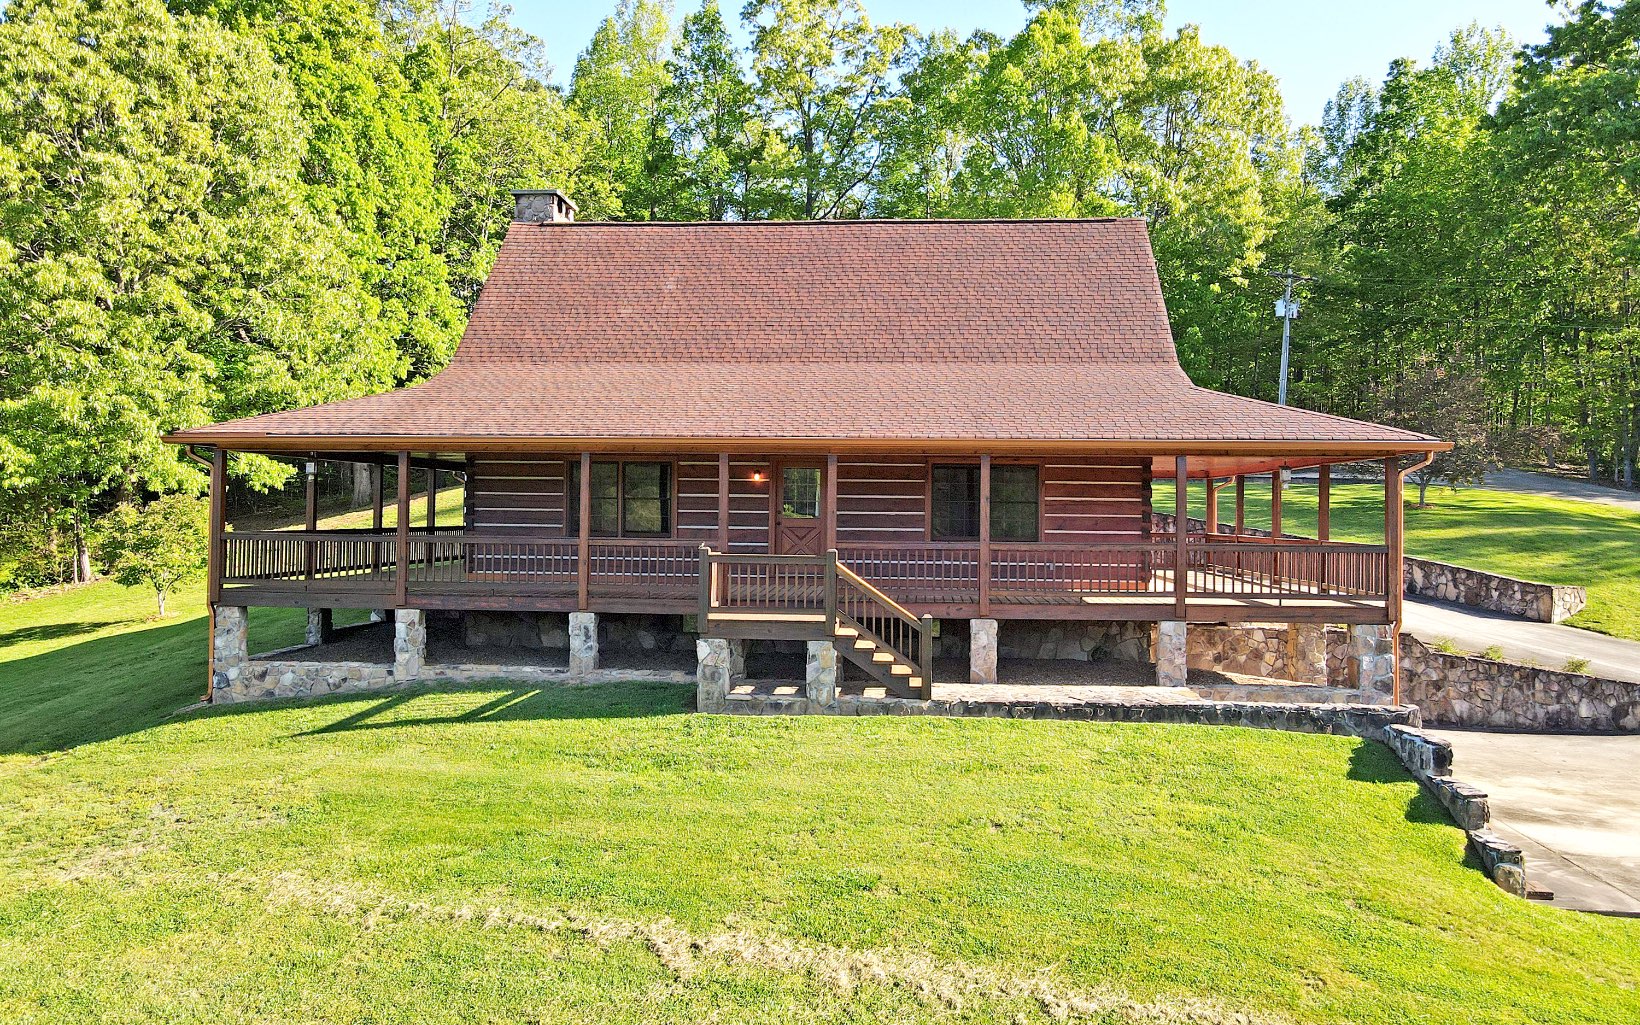 Pride of Ownership Beams from this 1 Owner Solid Chink Log Home. Never Before on the Market 2/2, Full Unfinished Basement, 3 Miles to Town, Year Round Views & NO Restrictions! Att: Car Enthusiasts, Carpenters, Photographers, Artists or Any Entrepreneurs Dreaming of Running their Business from Home! Say Hello to the Fabulous Detached 30x50 Workshop that could also be used as a Private “In-Home Studio!" Main Level 2 Car Garage = 1,280 Sq Ft, Carport & Basement Garage. Over 2 Acres, Room for a Garden. 1160 Sq Ft of Wrap Around Decking to Enjoy the Views & Country Setting! Step Inside: Gorgeous Soaring Ceilings, All Wood Interior, Floor to Ceiling Rocked Wood Burning FP. Kitchen w/ Large Dining Area, Wood Floors & Exposed Wood Beams. Whole House Wood Heater. Lots of Potential with this Stunning Cabin! Close to the Beasley Knob OHV Trails, Vogel State Park & Lake Nottely!